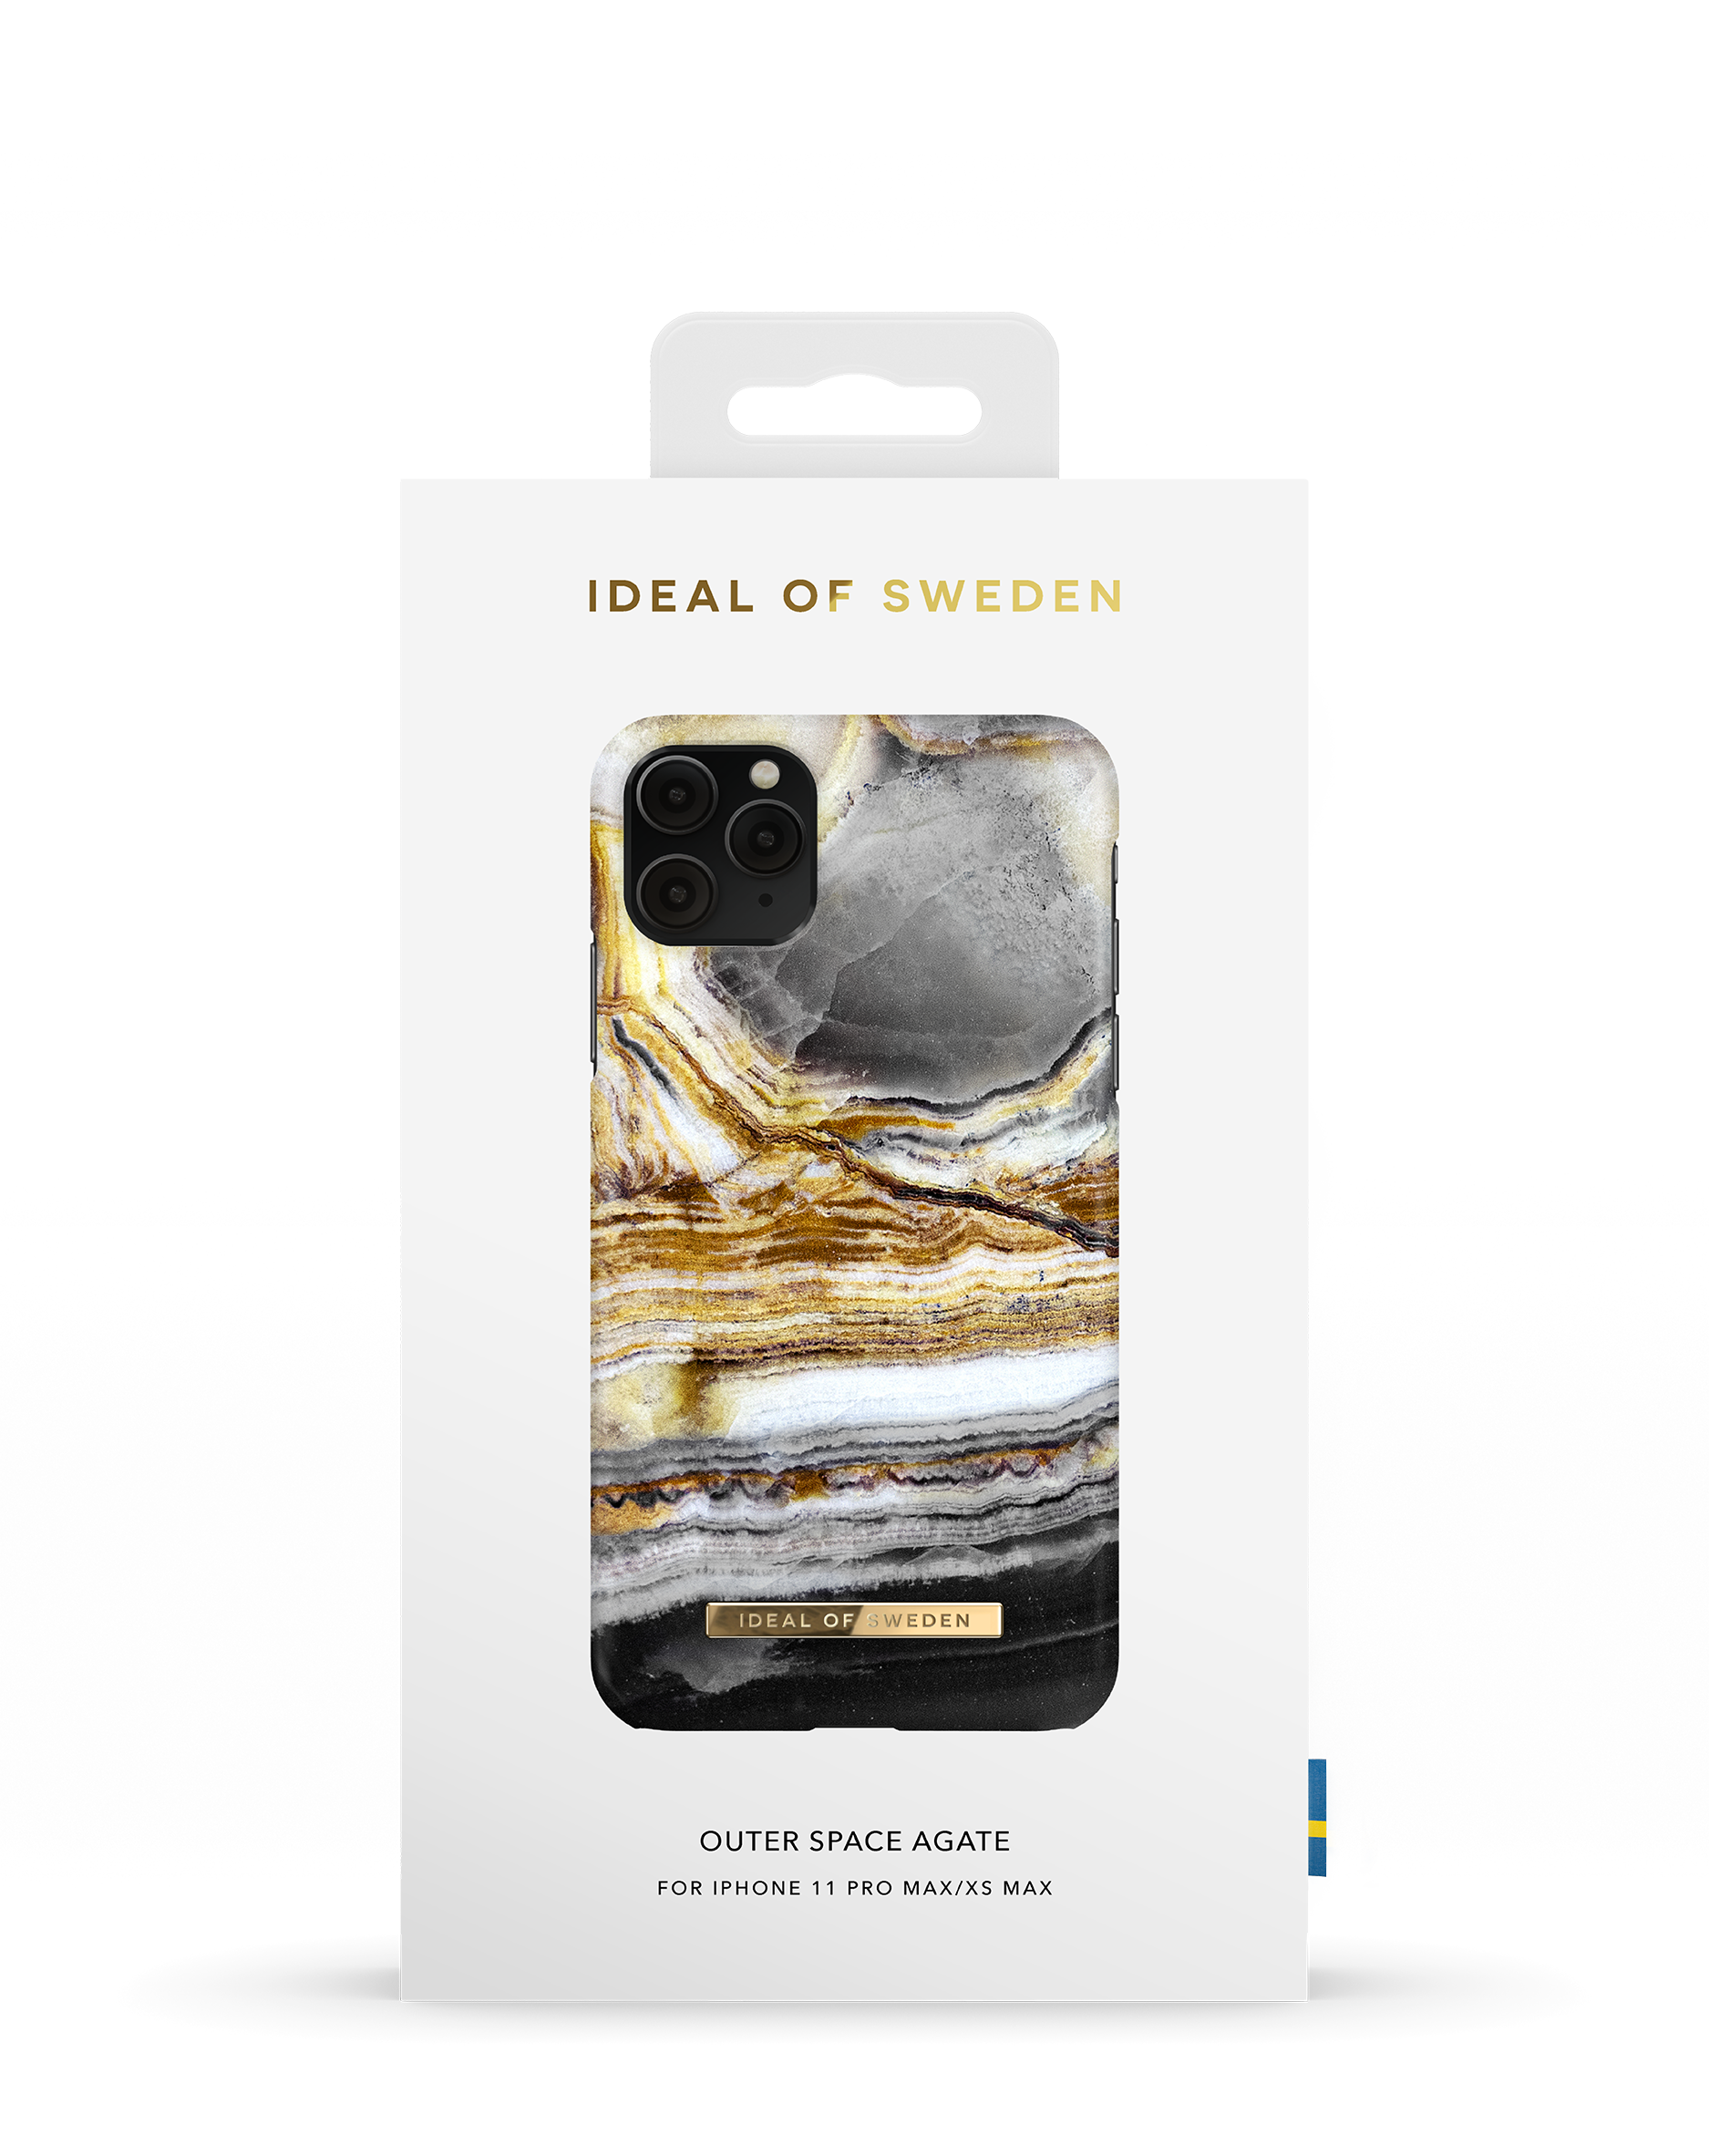 Apple Space OF Marble Apple, Max, XS IDFCAW18-I1965-99, SWEDEN Pro Apple Backcover, iPhone 11 Max, iPhone IDEAL Outer